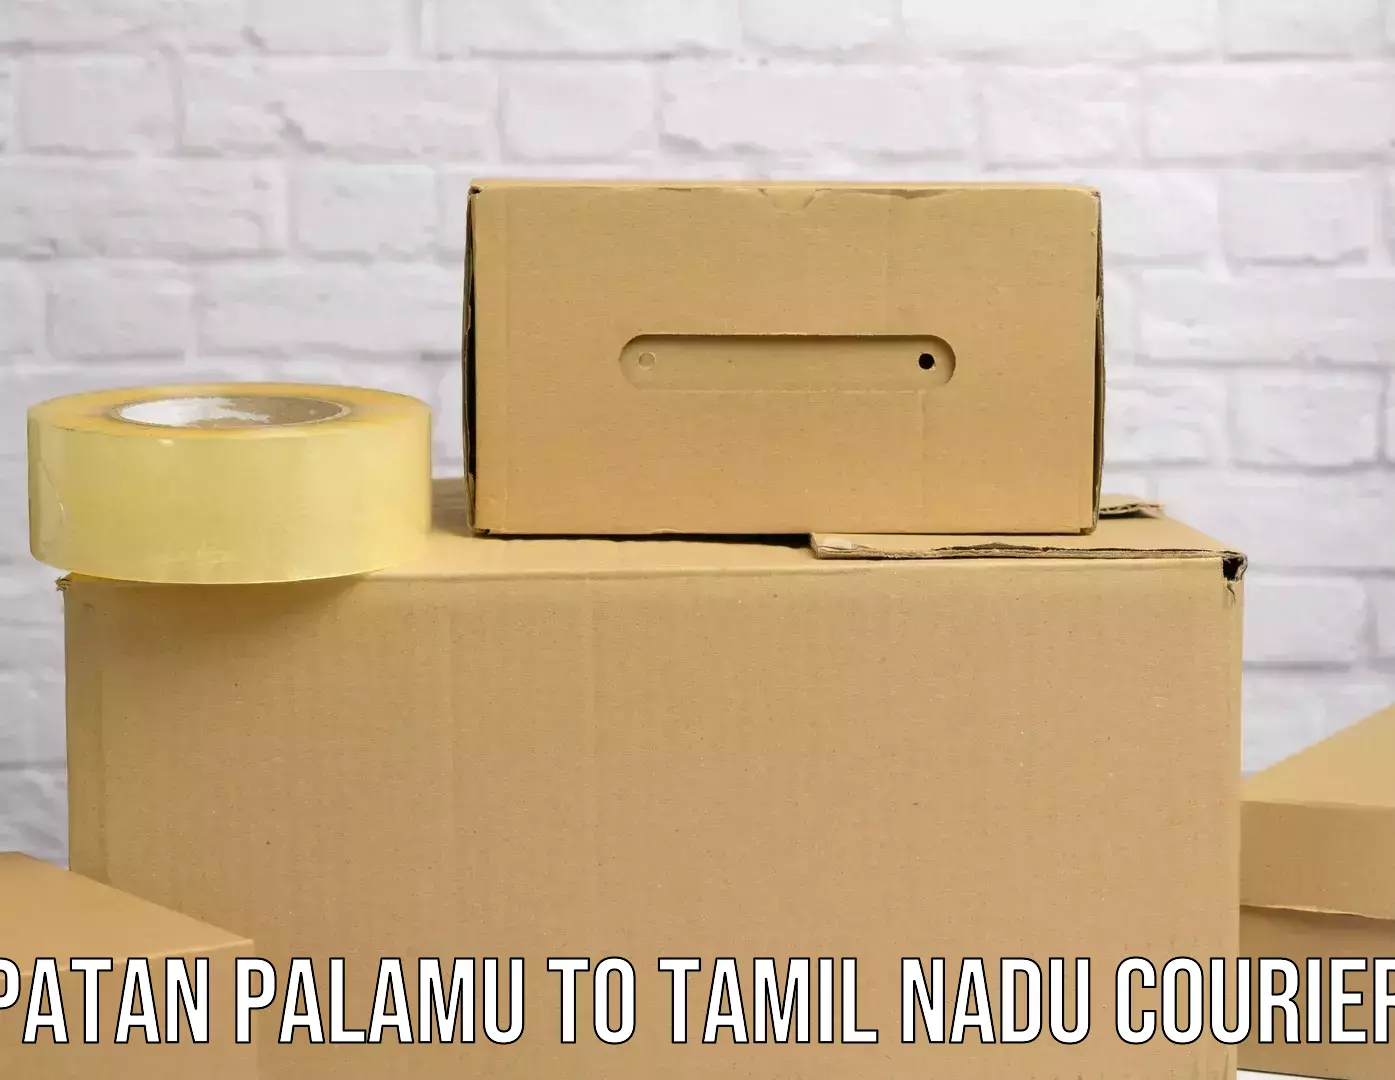 Express delivery solutions Patan Palamu to Ennore Port Chennai